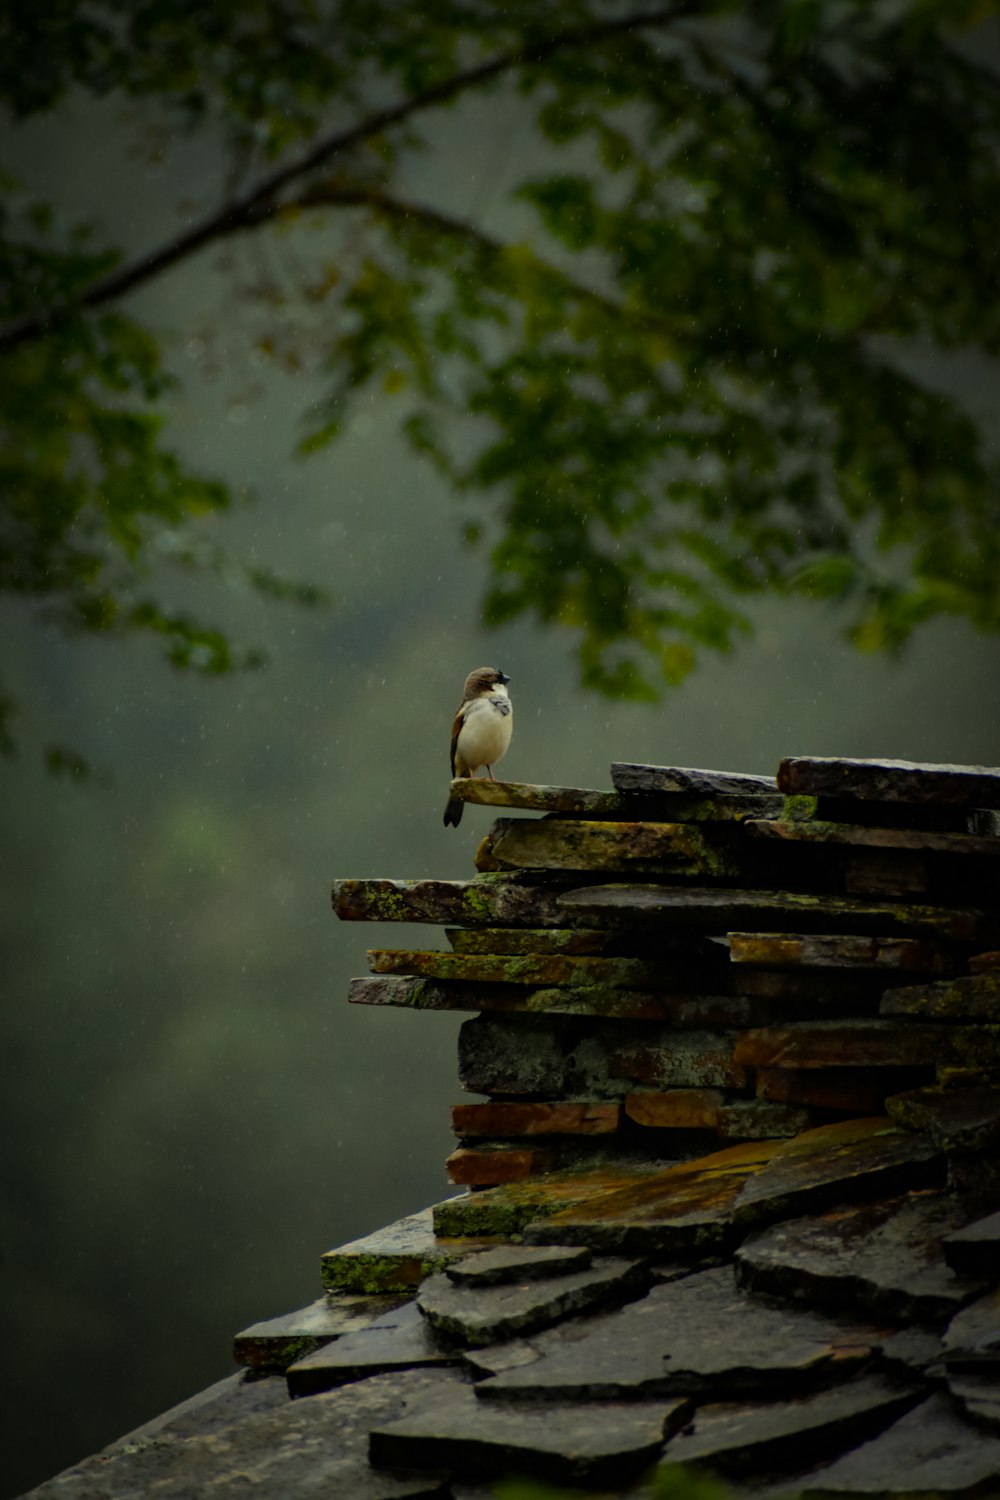 a small bird perched on top of a roof